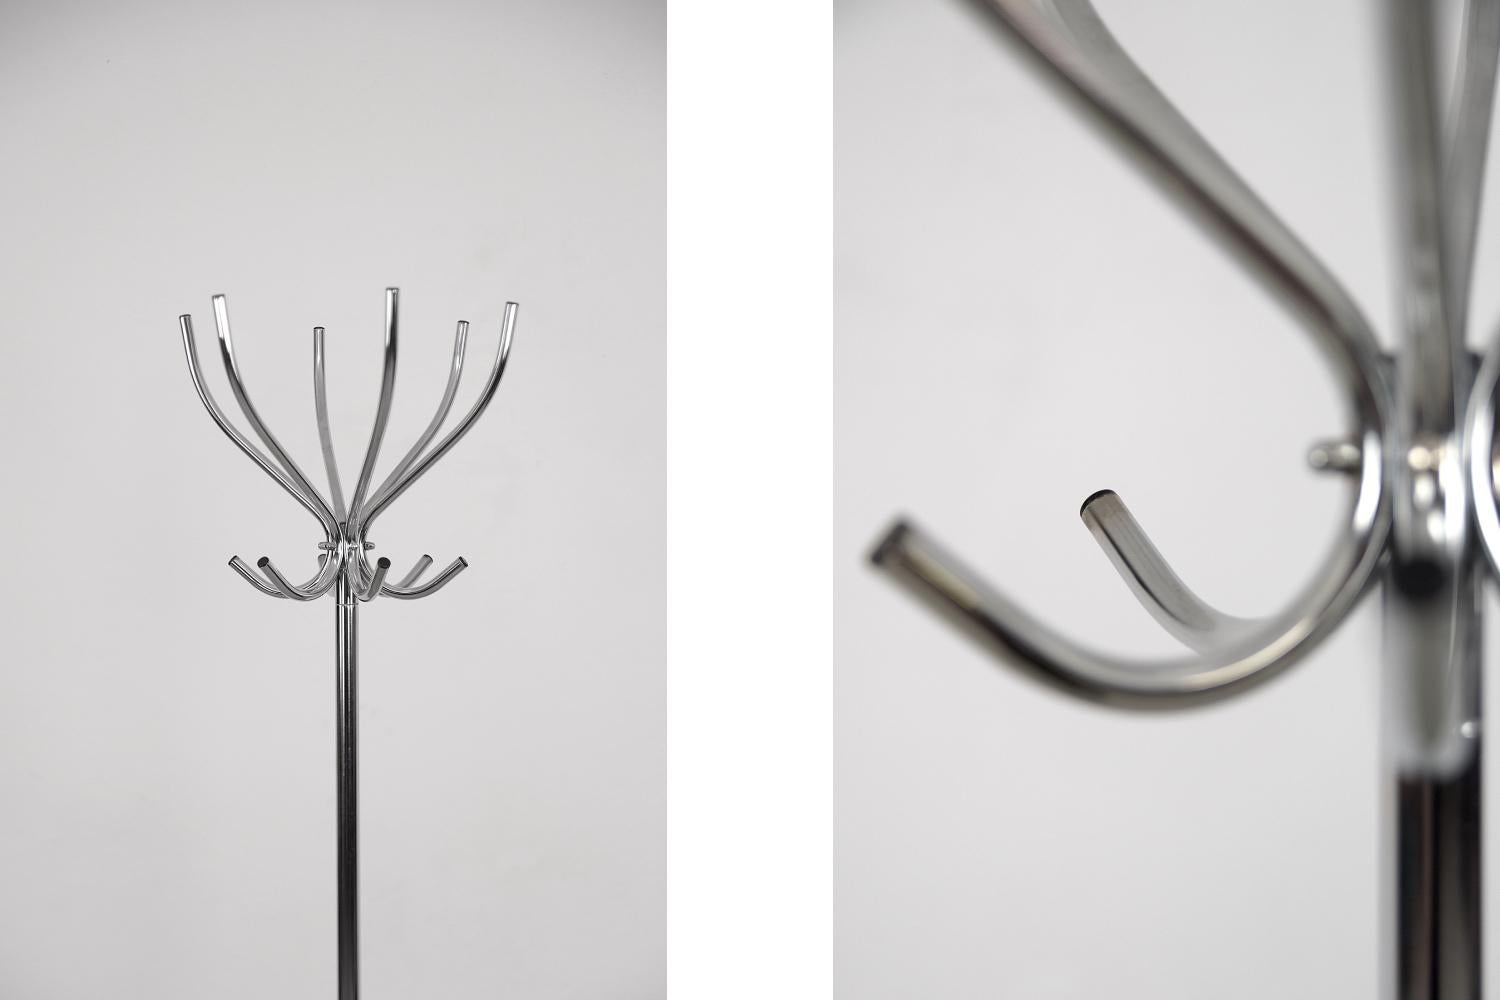 This chrome-plated floor rack was manufactured by the Swedish company Rörmekano and Skånes Fagerhult AB during the 1980s. It is Piccolo model. This piece is made of chrome steel. It has a crown with 12 hangers for clothes and is mounted on four